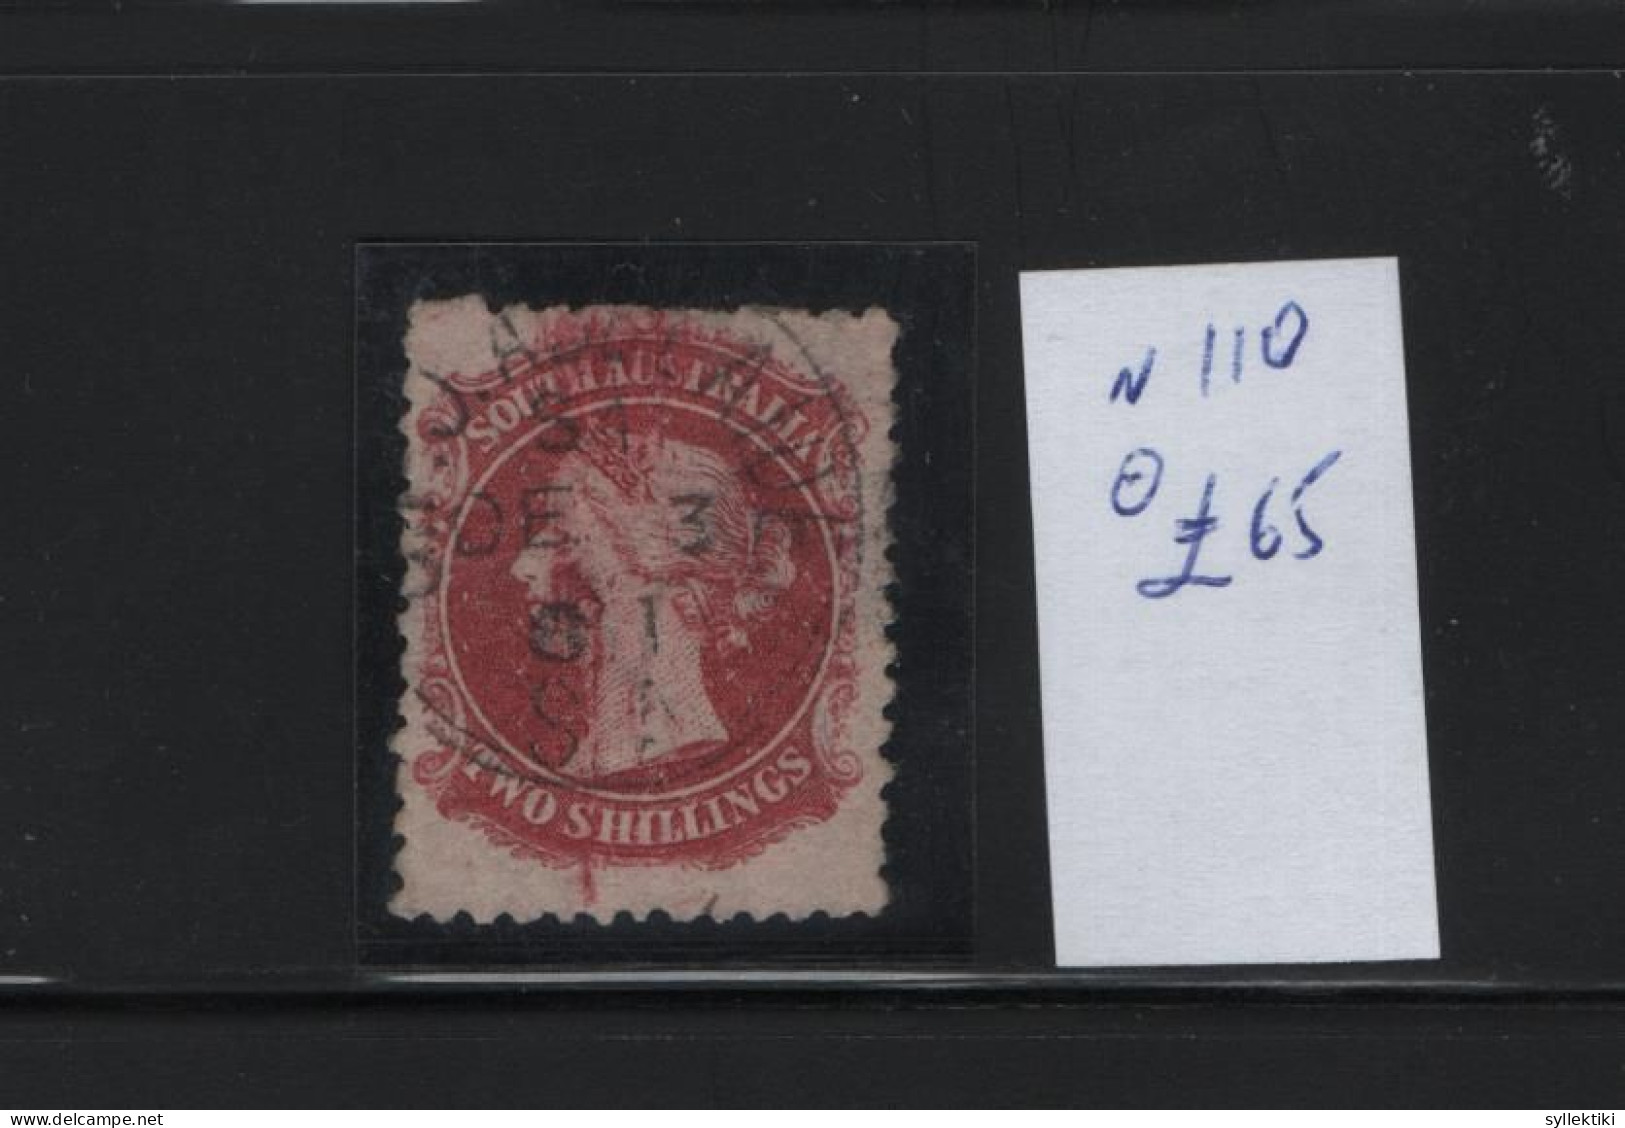 SOUTH AUSTRALIA  1870/73 2 SHILLINGS USED STAMP   STANLEY GIBBONS No 110 AND VALUE GBP 65.00 - Gebruikt